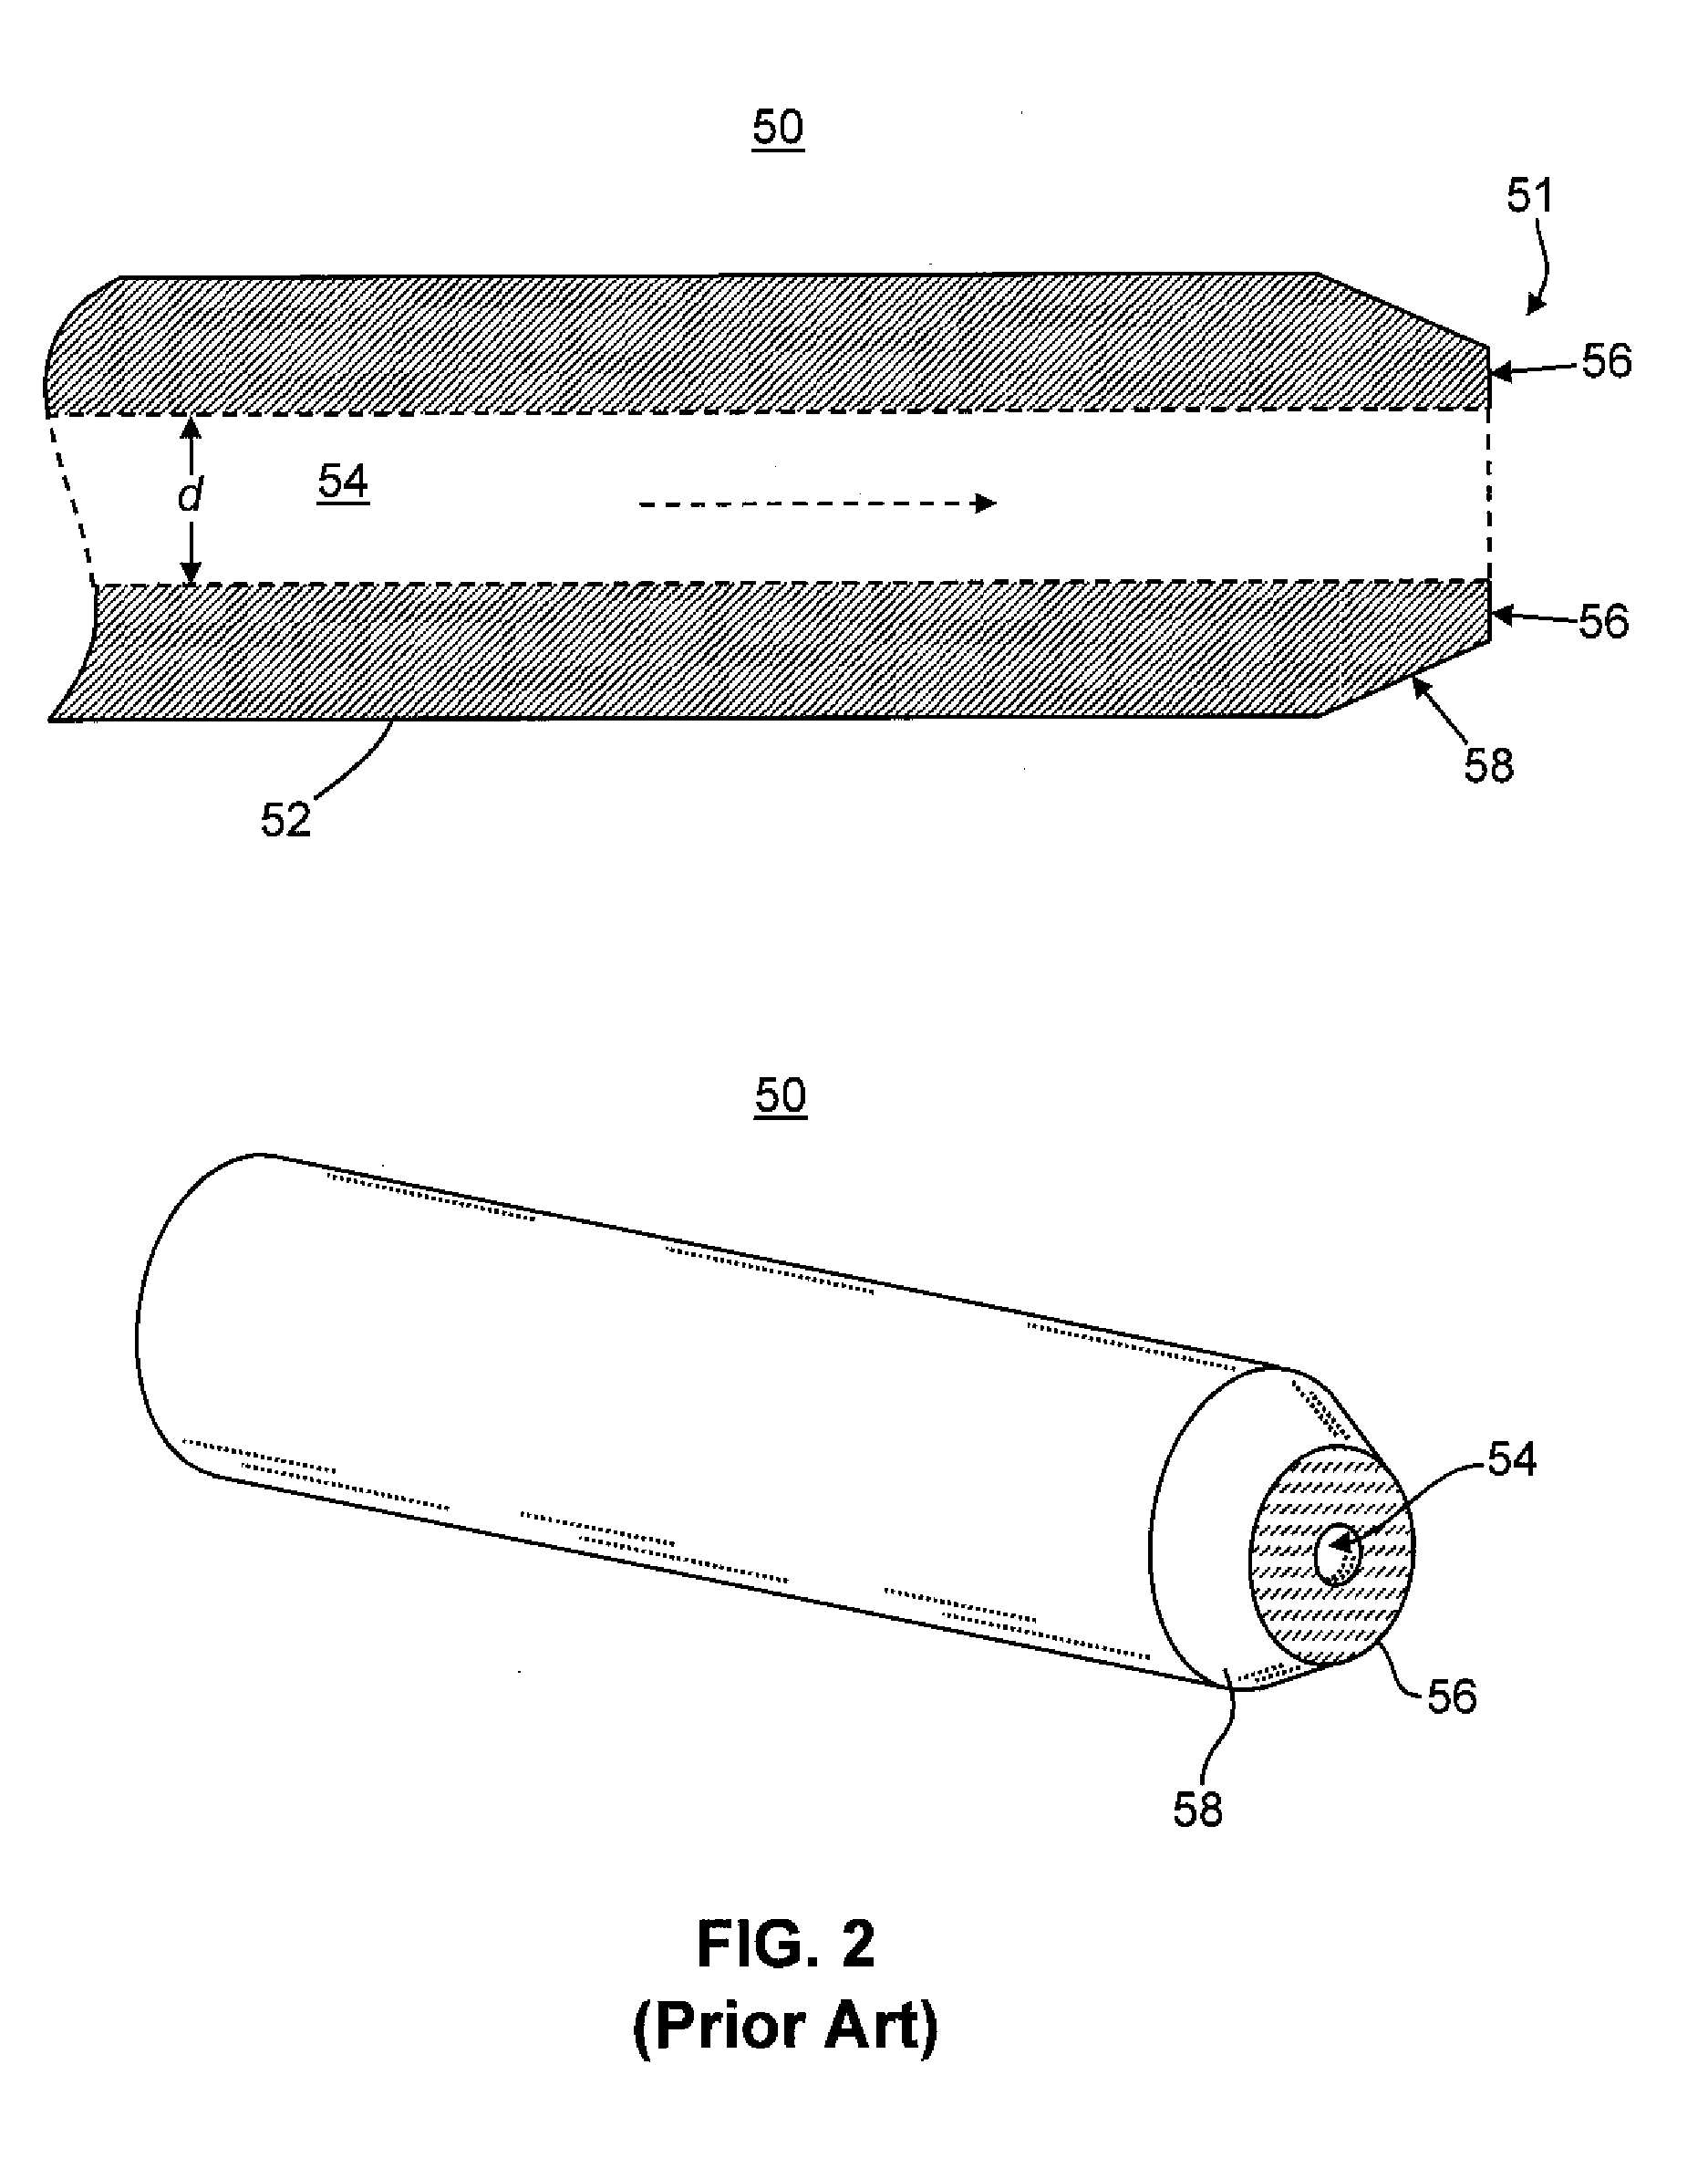 Ion Transfer Tube for a Mass Spectrometer System